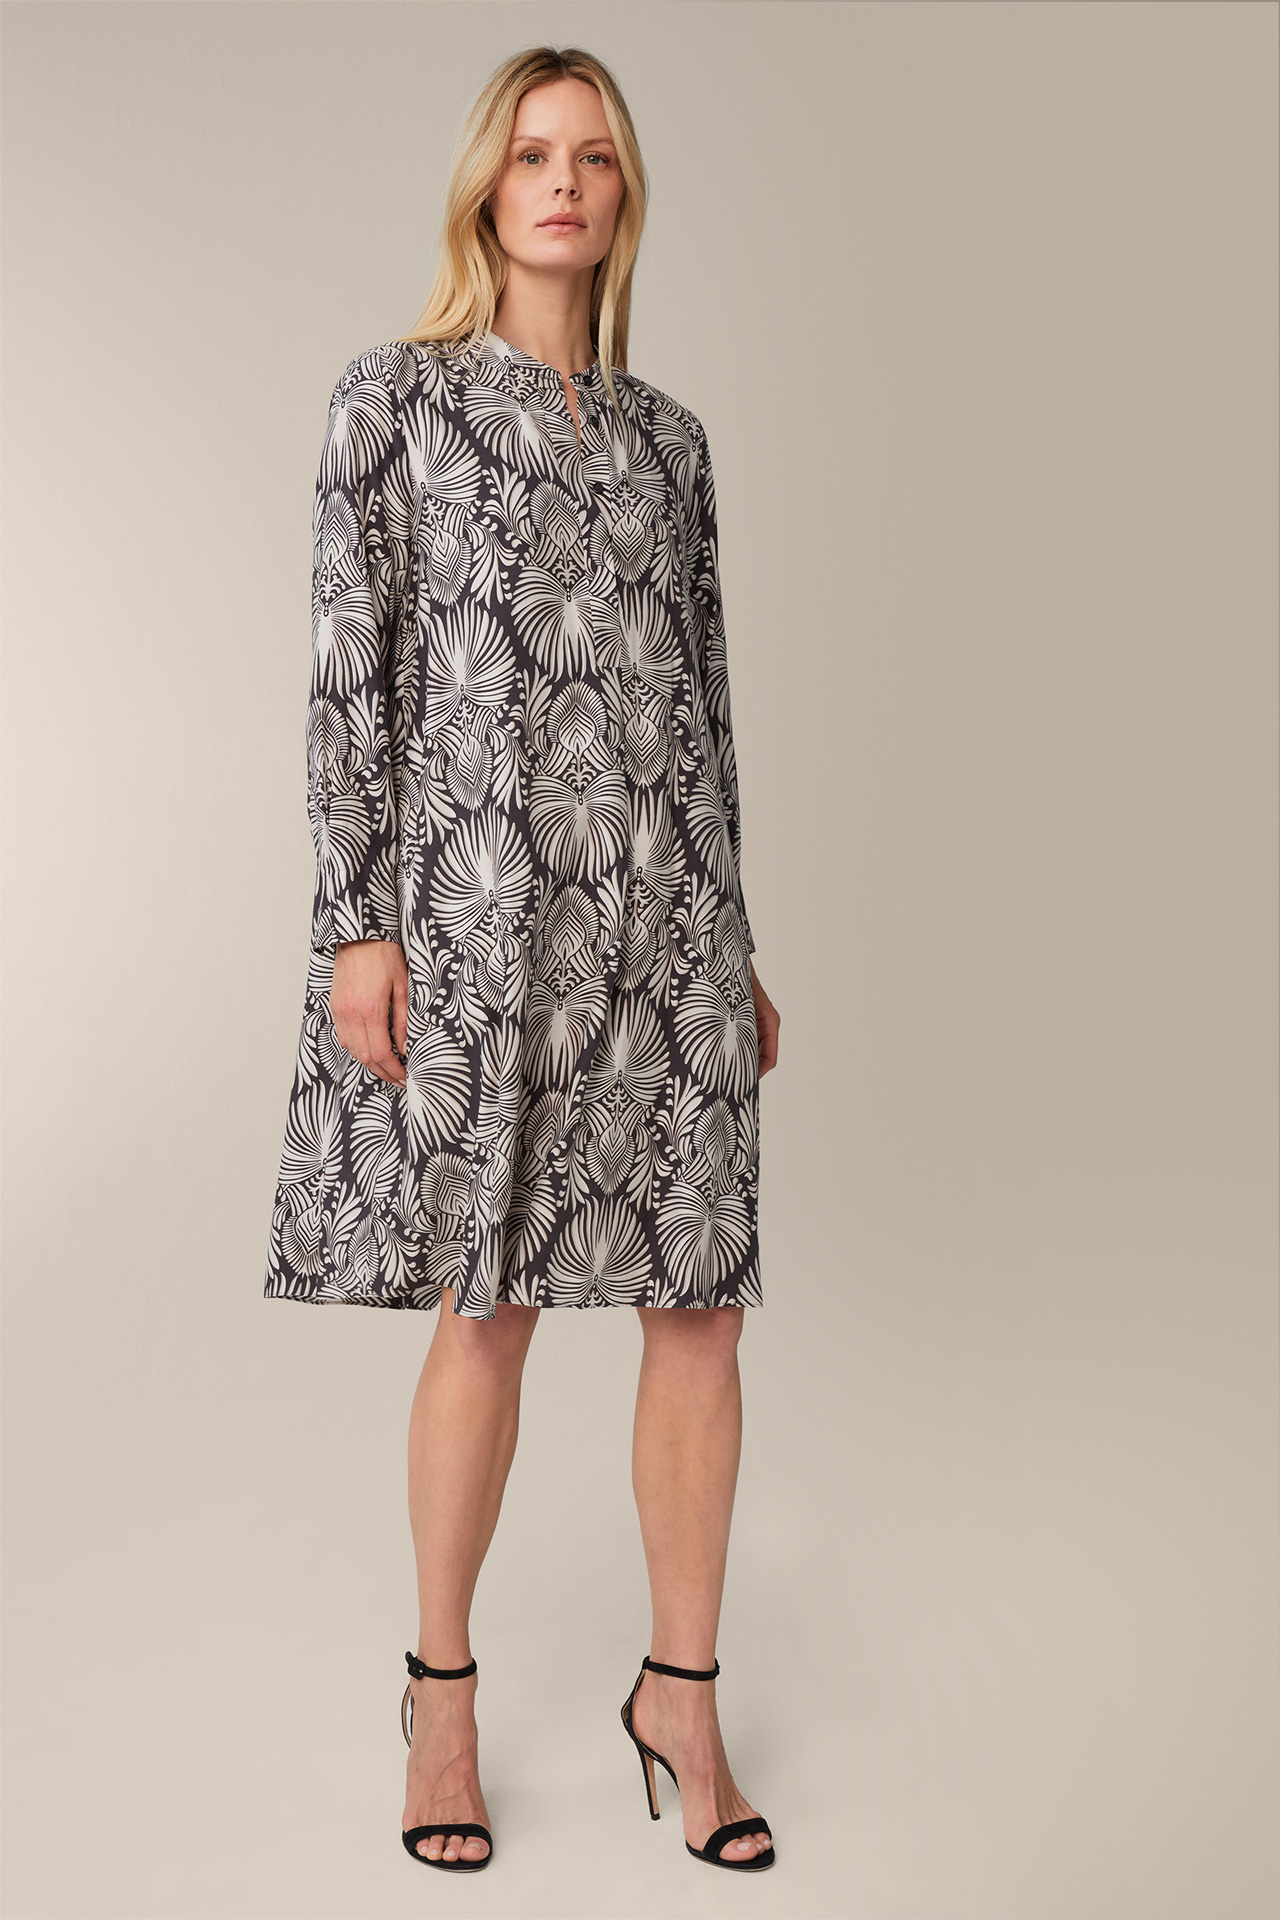 Print dress with stand-up collar in viscose and silk in an anthracite and ecru pattern